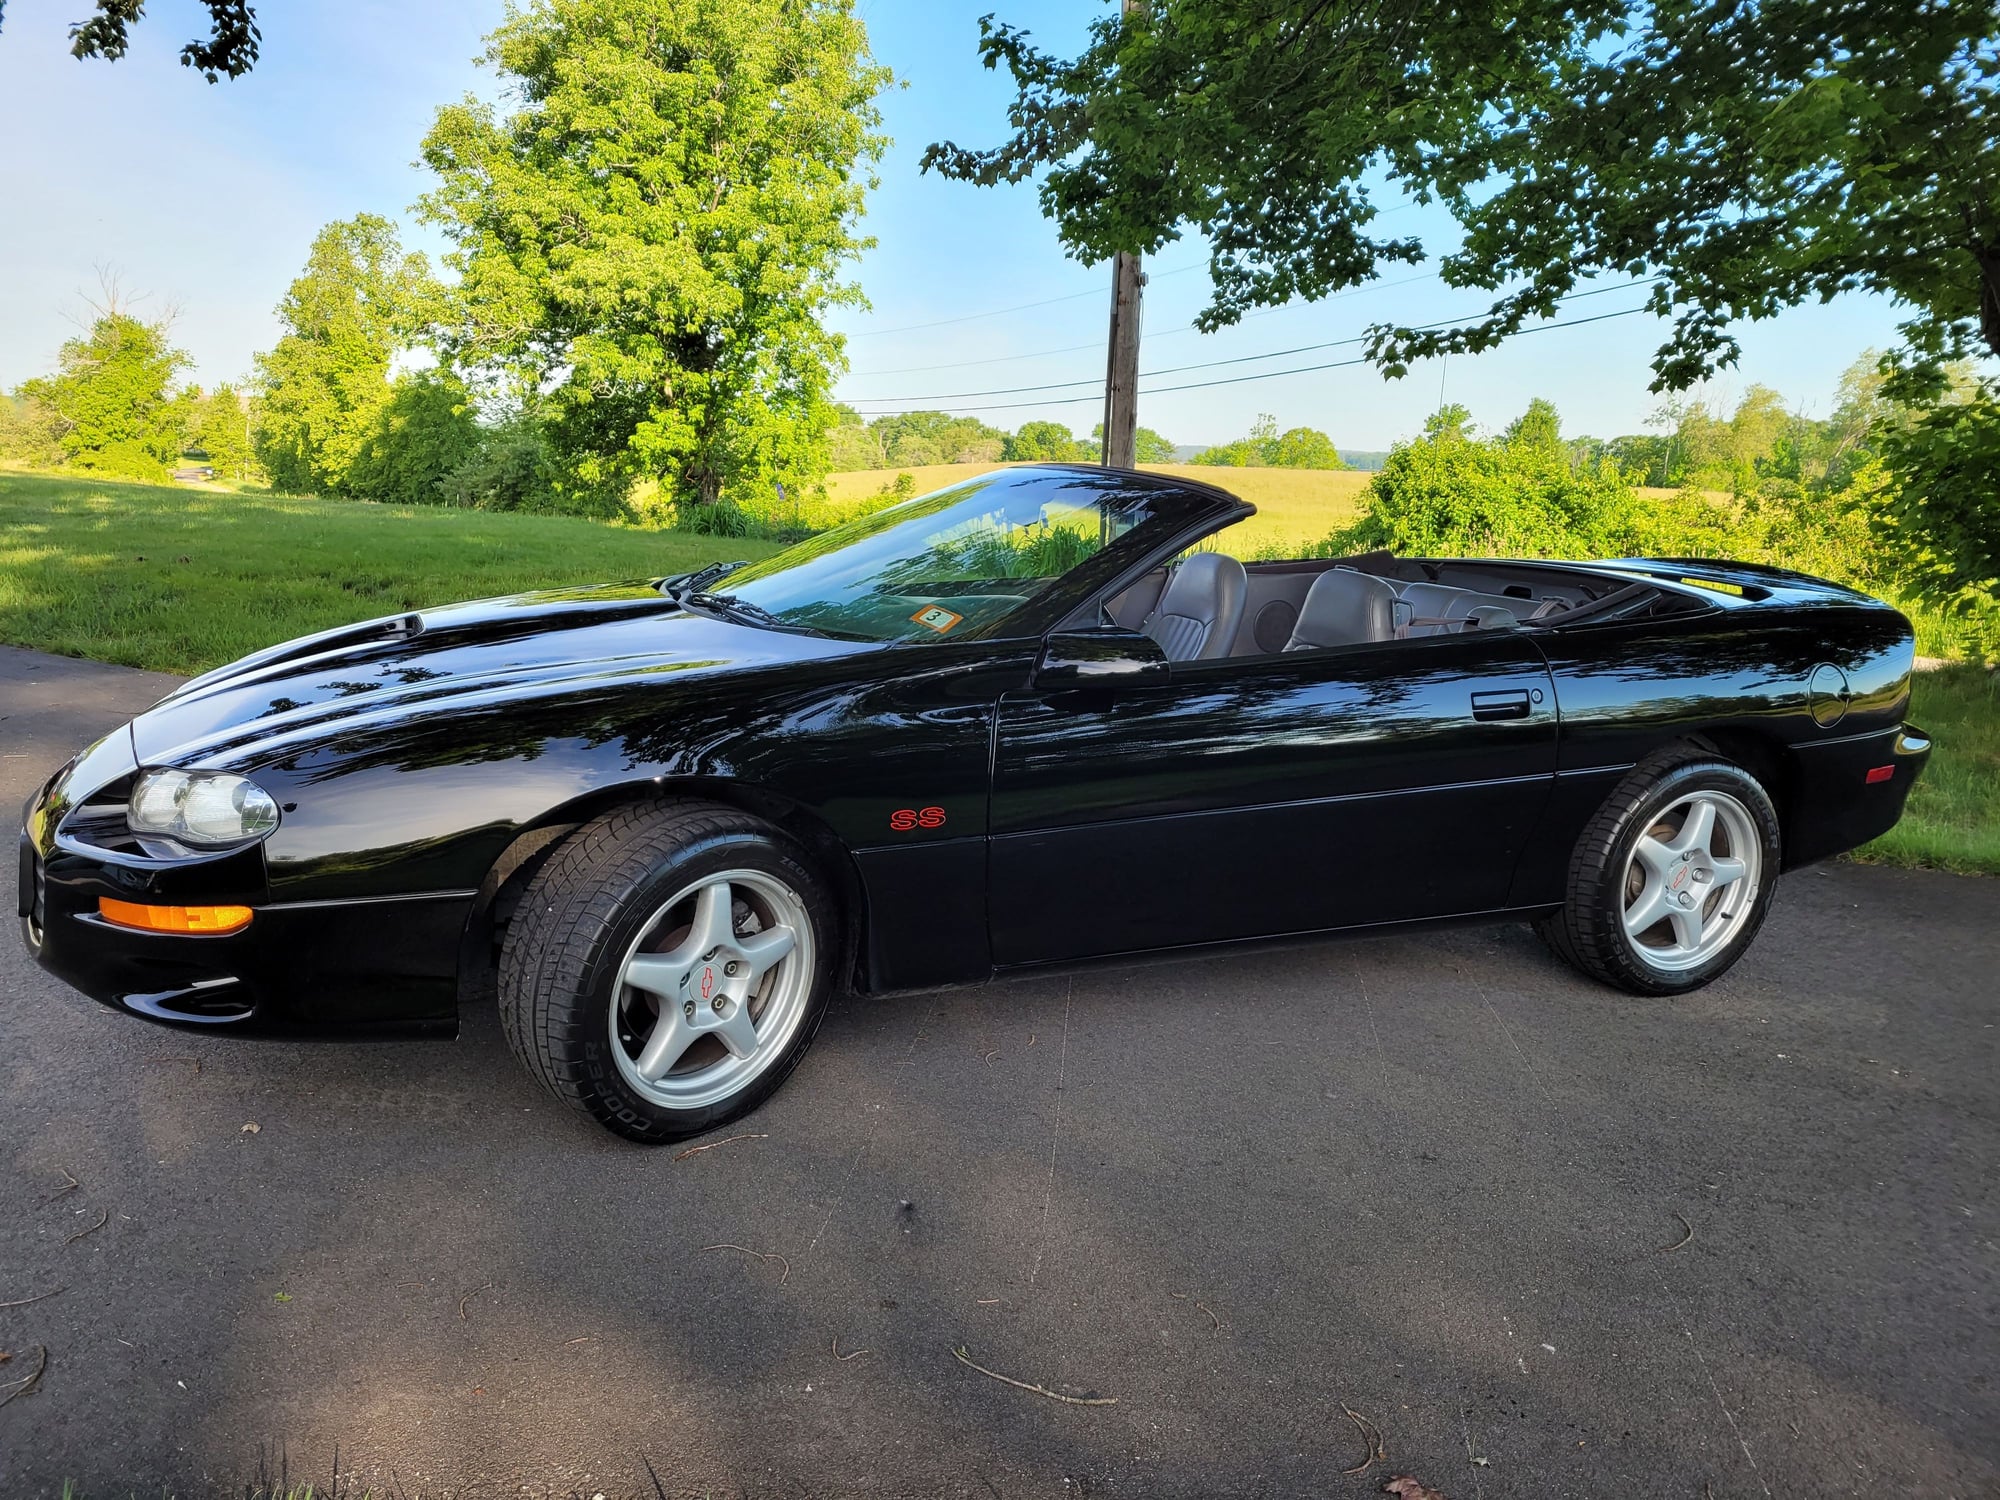 1999 Chevrolet Camaro - 1999 Camaro SS Convertible 68k Miles All Original - Used - VIN 123456789123456 - 68,400 Miles - 8 cyl - 2WD - Automatic - Convertible - Black - Greenland, NH 03840, United States